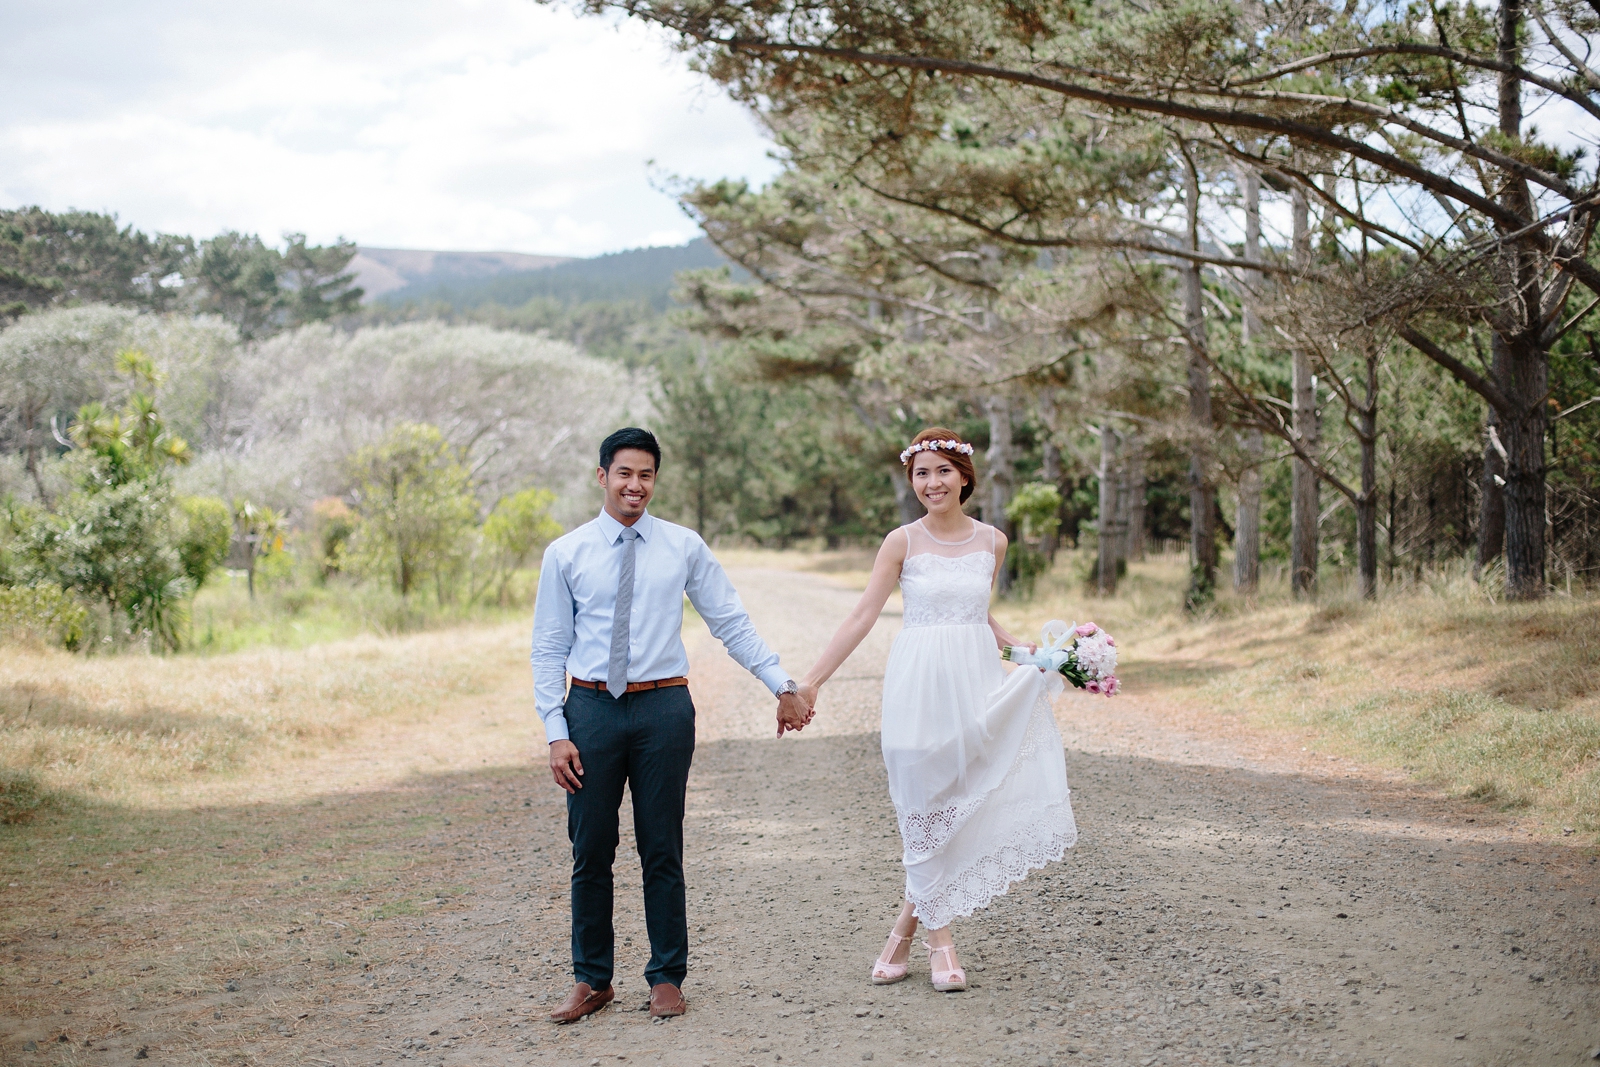 Ram and Gia / Auckland Elopement Photographer / © Patty Lagera Photography